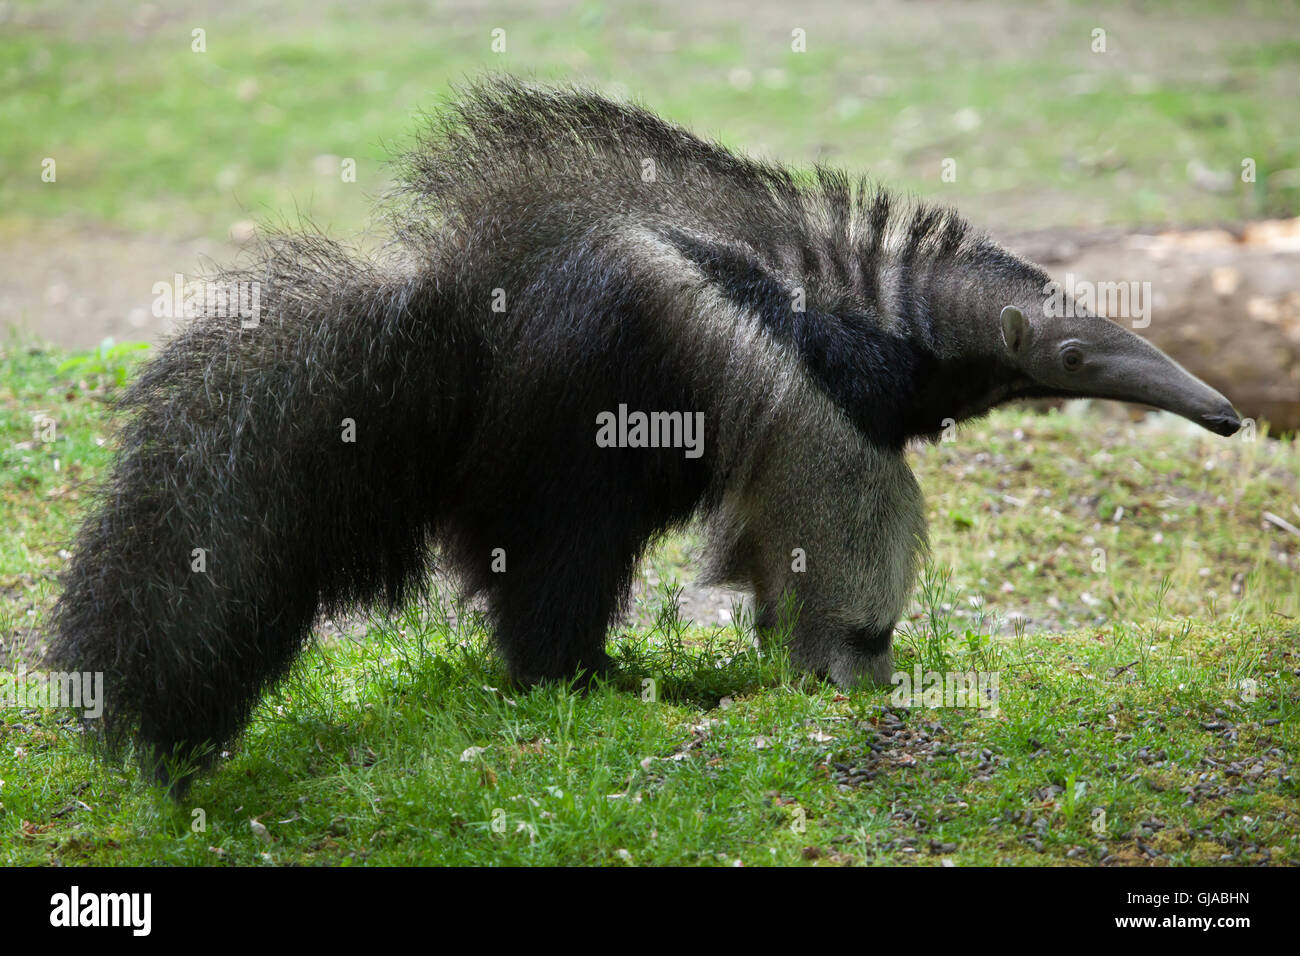 Giant anteater (Myrmecophaga tridactyla), noto anche come l'orso ant. Foto Stock